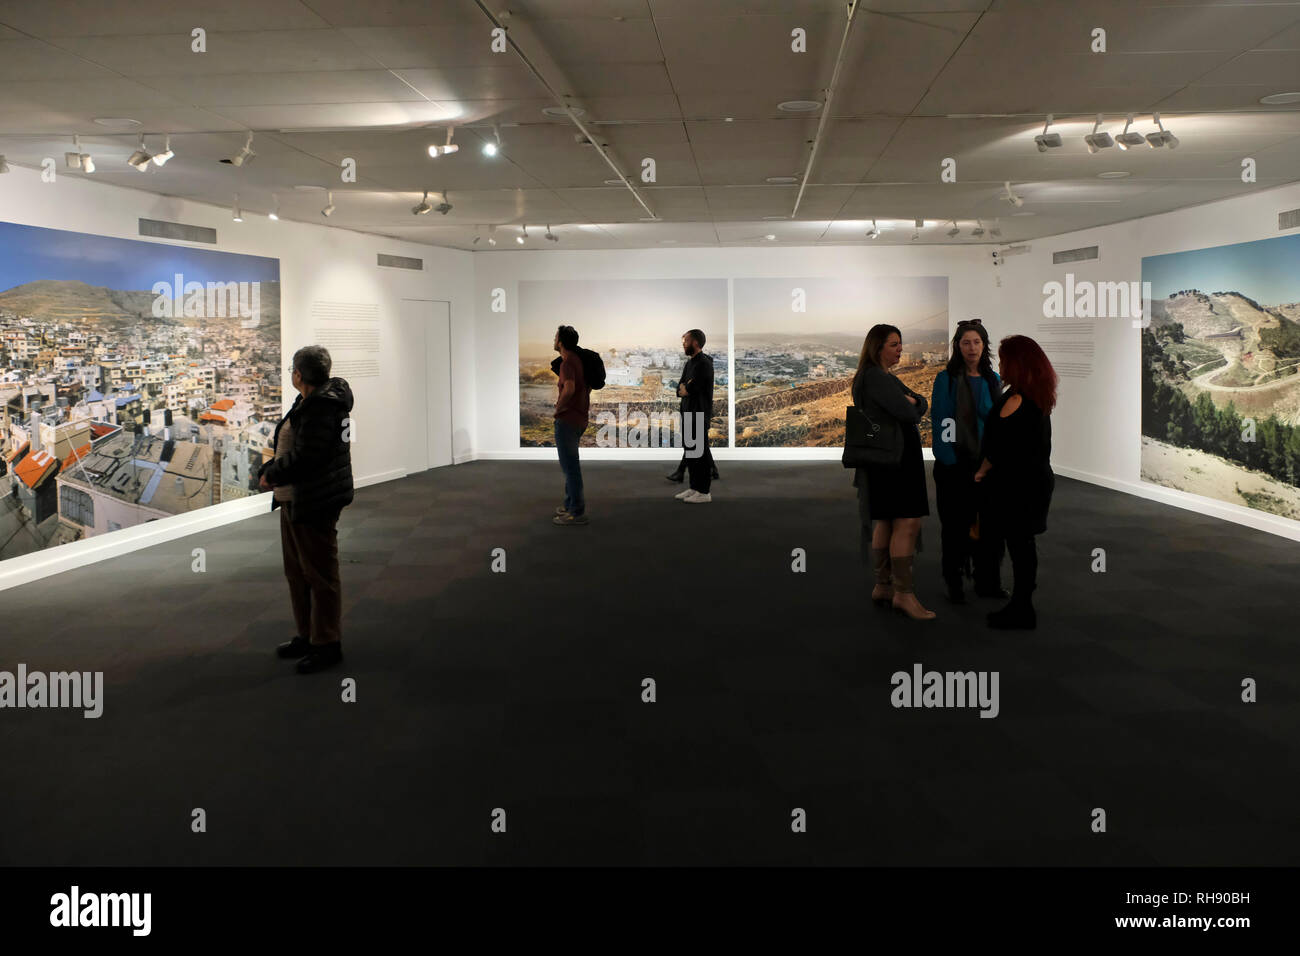 Jerusalem Israel, 01 February 2019. Israeli visitors view the work of Israeli photographer and artist Yaakov Israel entitled 'Legitimacy of Landscape' exhibited at the Museum for Islamic Art in West Jerusalem Israel. The exhibition provokes thought about places that have been forgotten in Israeli society and summarizes a 16 year project during which Yaakov took photographs of Arab, Bedouin and Druze villages in Israel and the Occupied Territories, a sort of voyage through the sociopolitical landscapes of the country. Stock Photo